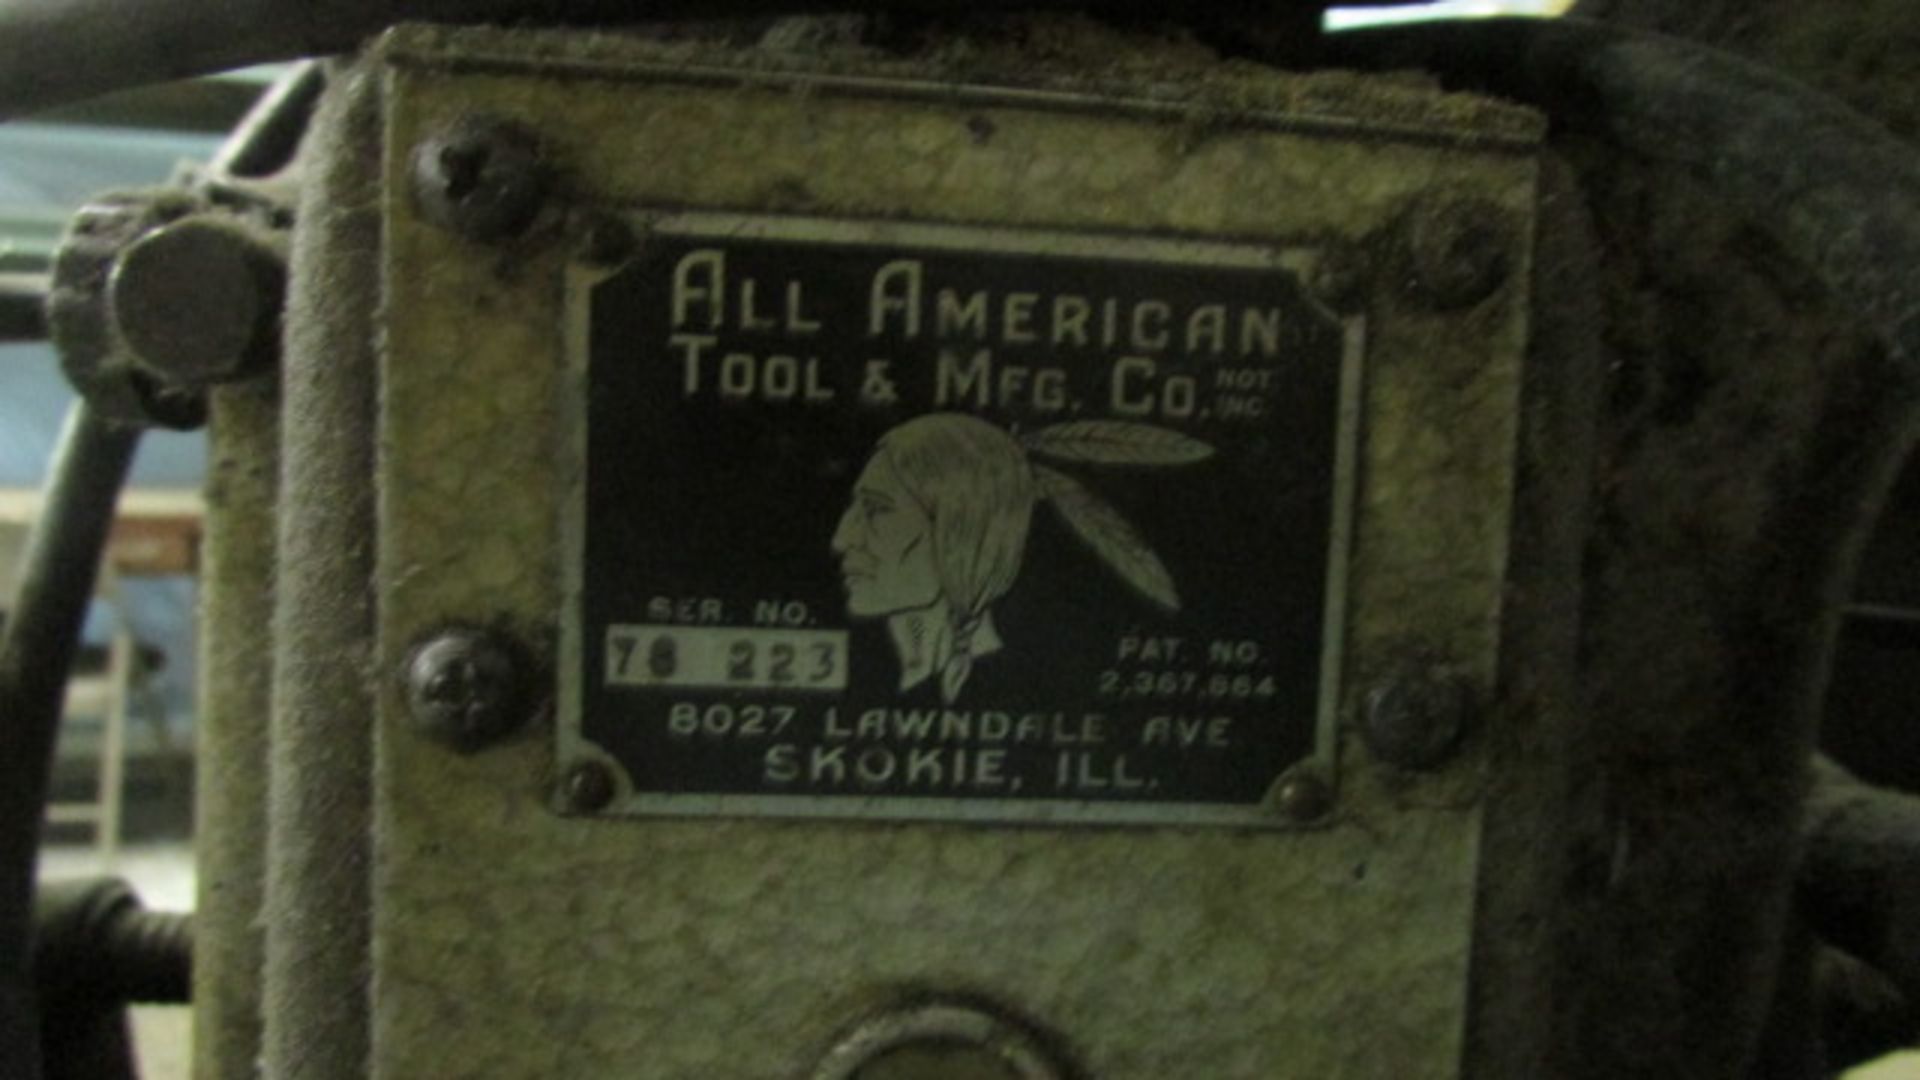 All American Shaping Machine, s/n 78223 - Image 2 of 2